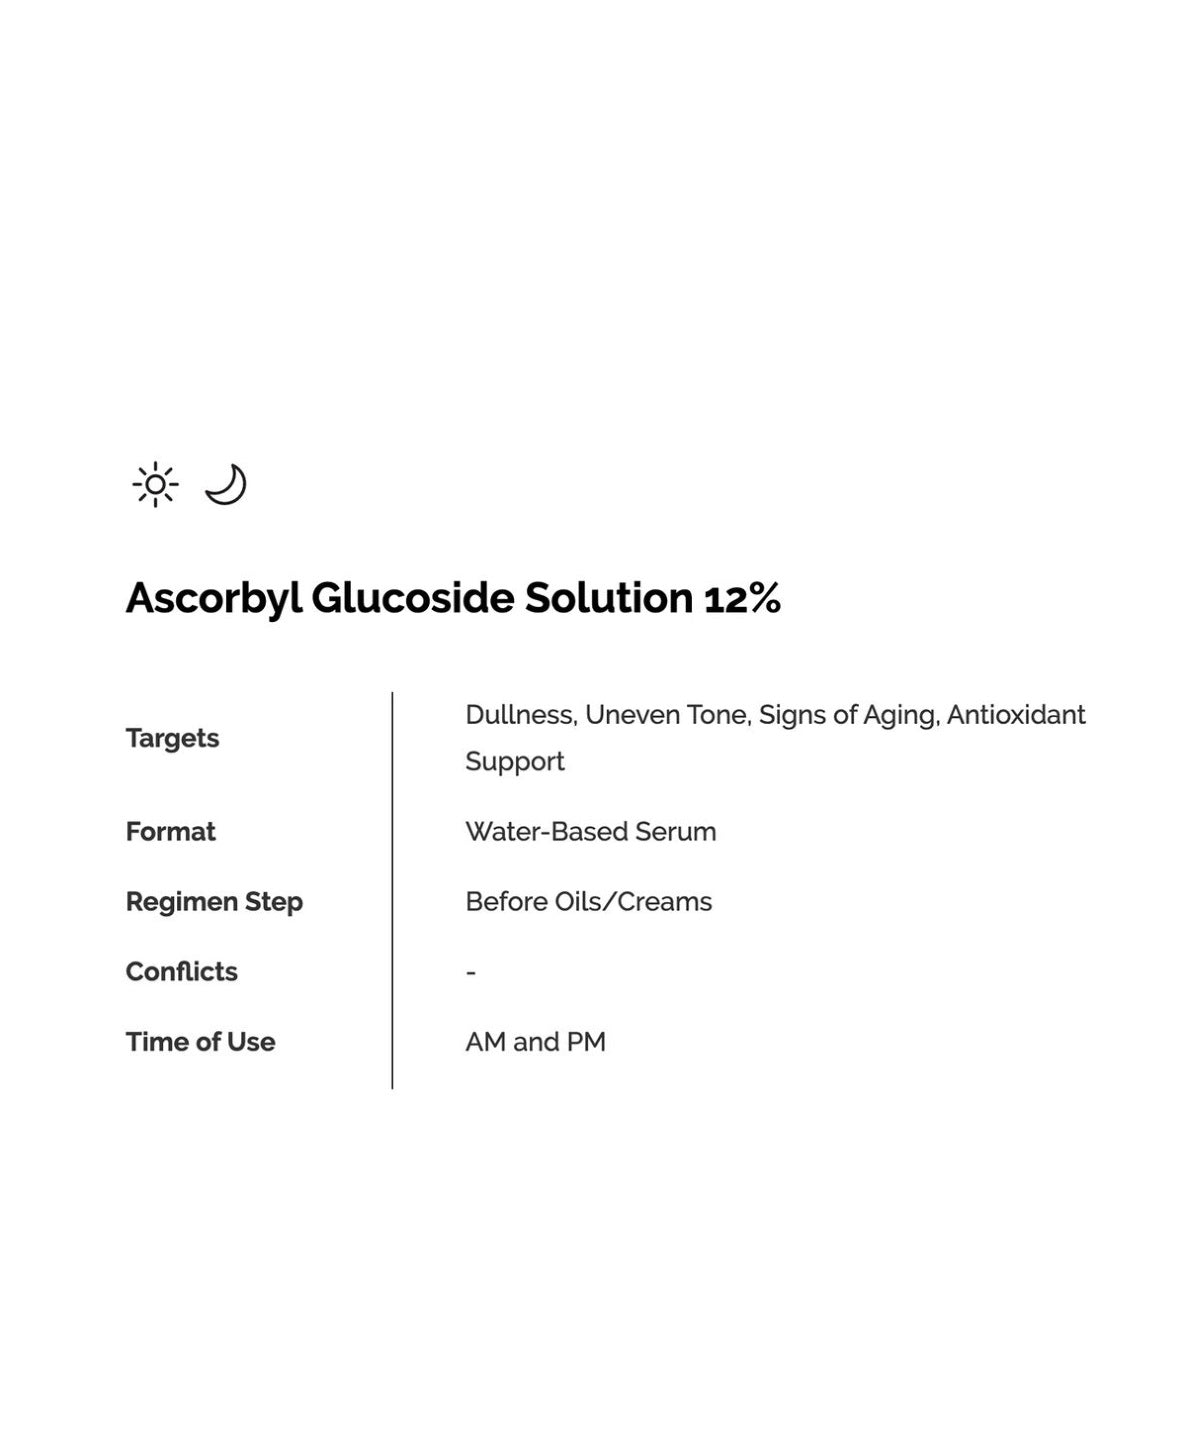 Ascorbyl Glucoside Solution 12% by The Ordinary in UAE, Dubai and Abu Dhabi at Shopey